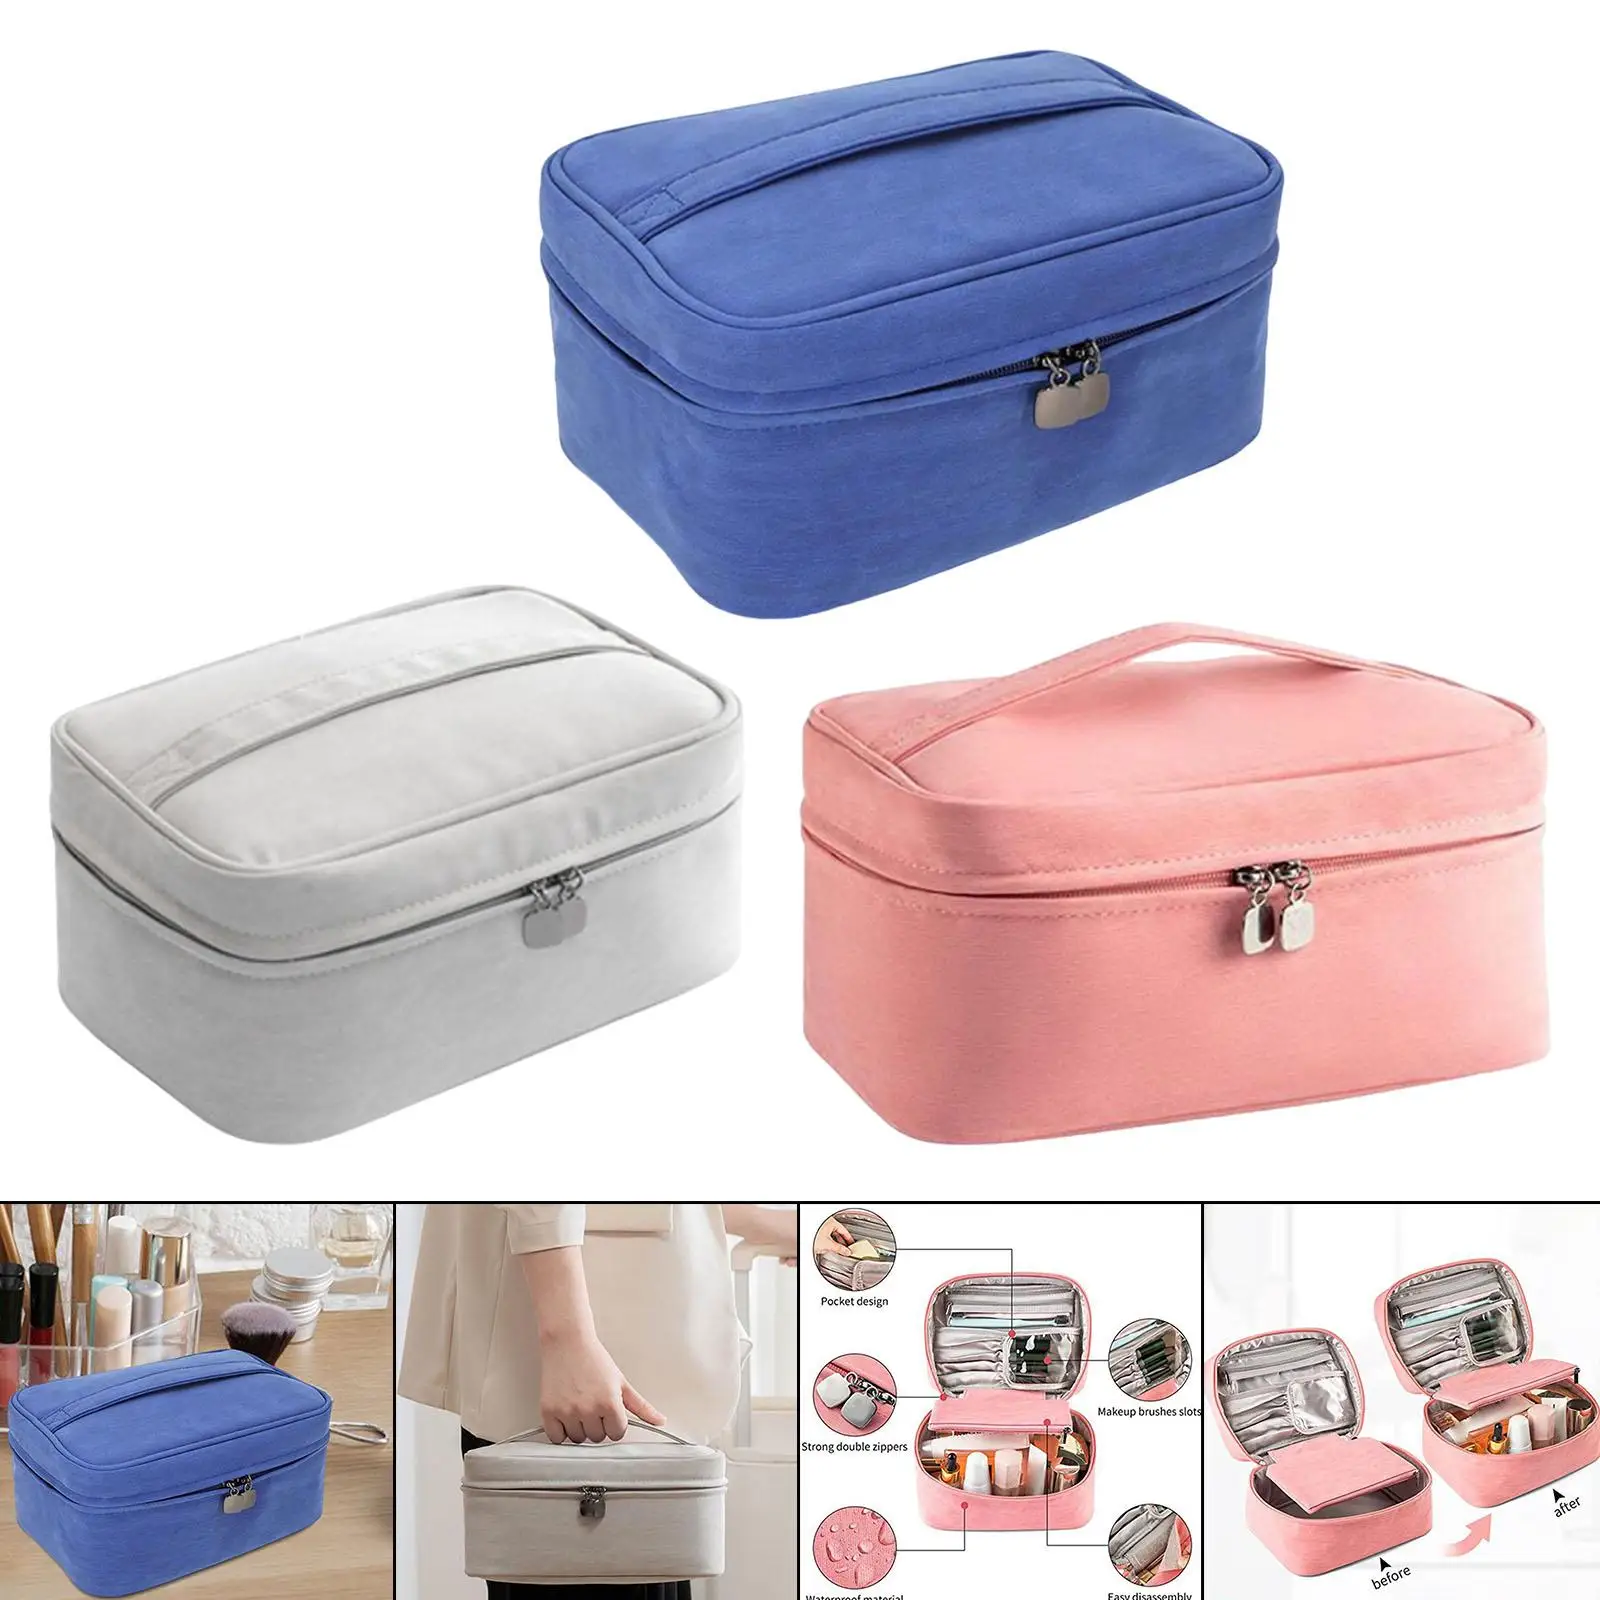 Makeup Organizer Bag with Detachable Pouch Make up Bag Cosmetic Case for Makeup Brush Beauty Eggs Lotion Eye Shadow Lipstick